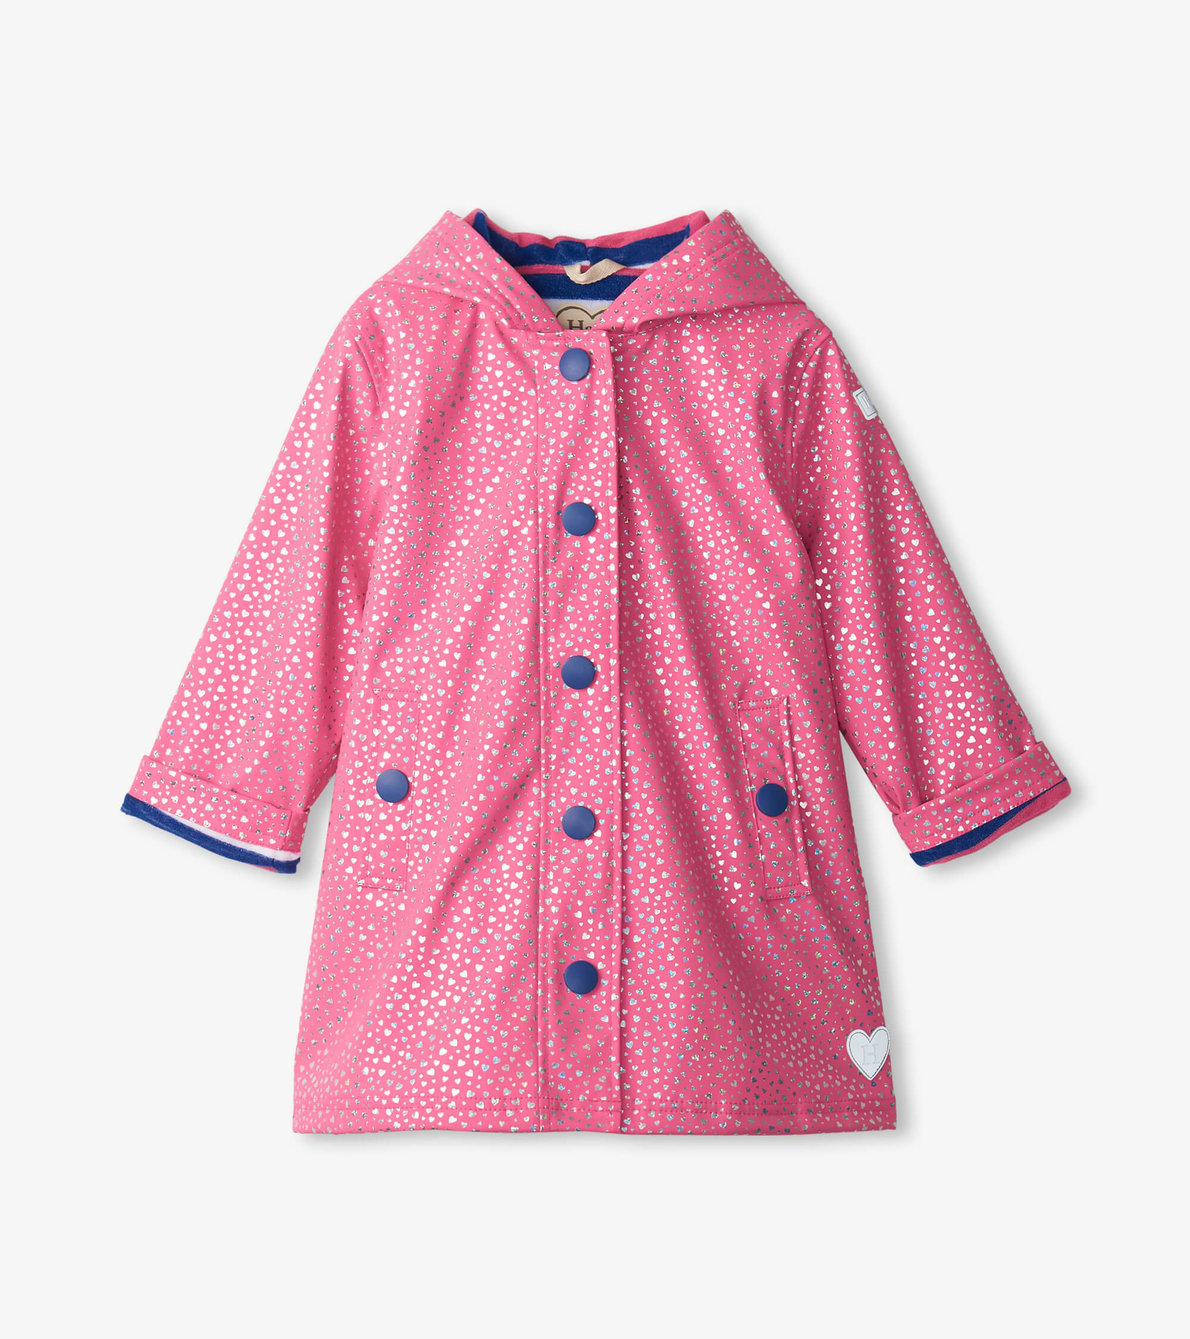 View larger image of Girls Glitter Hearts Button-Up Raincoat